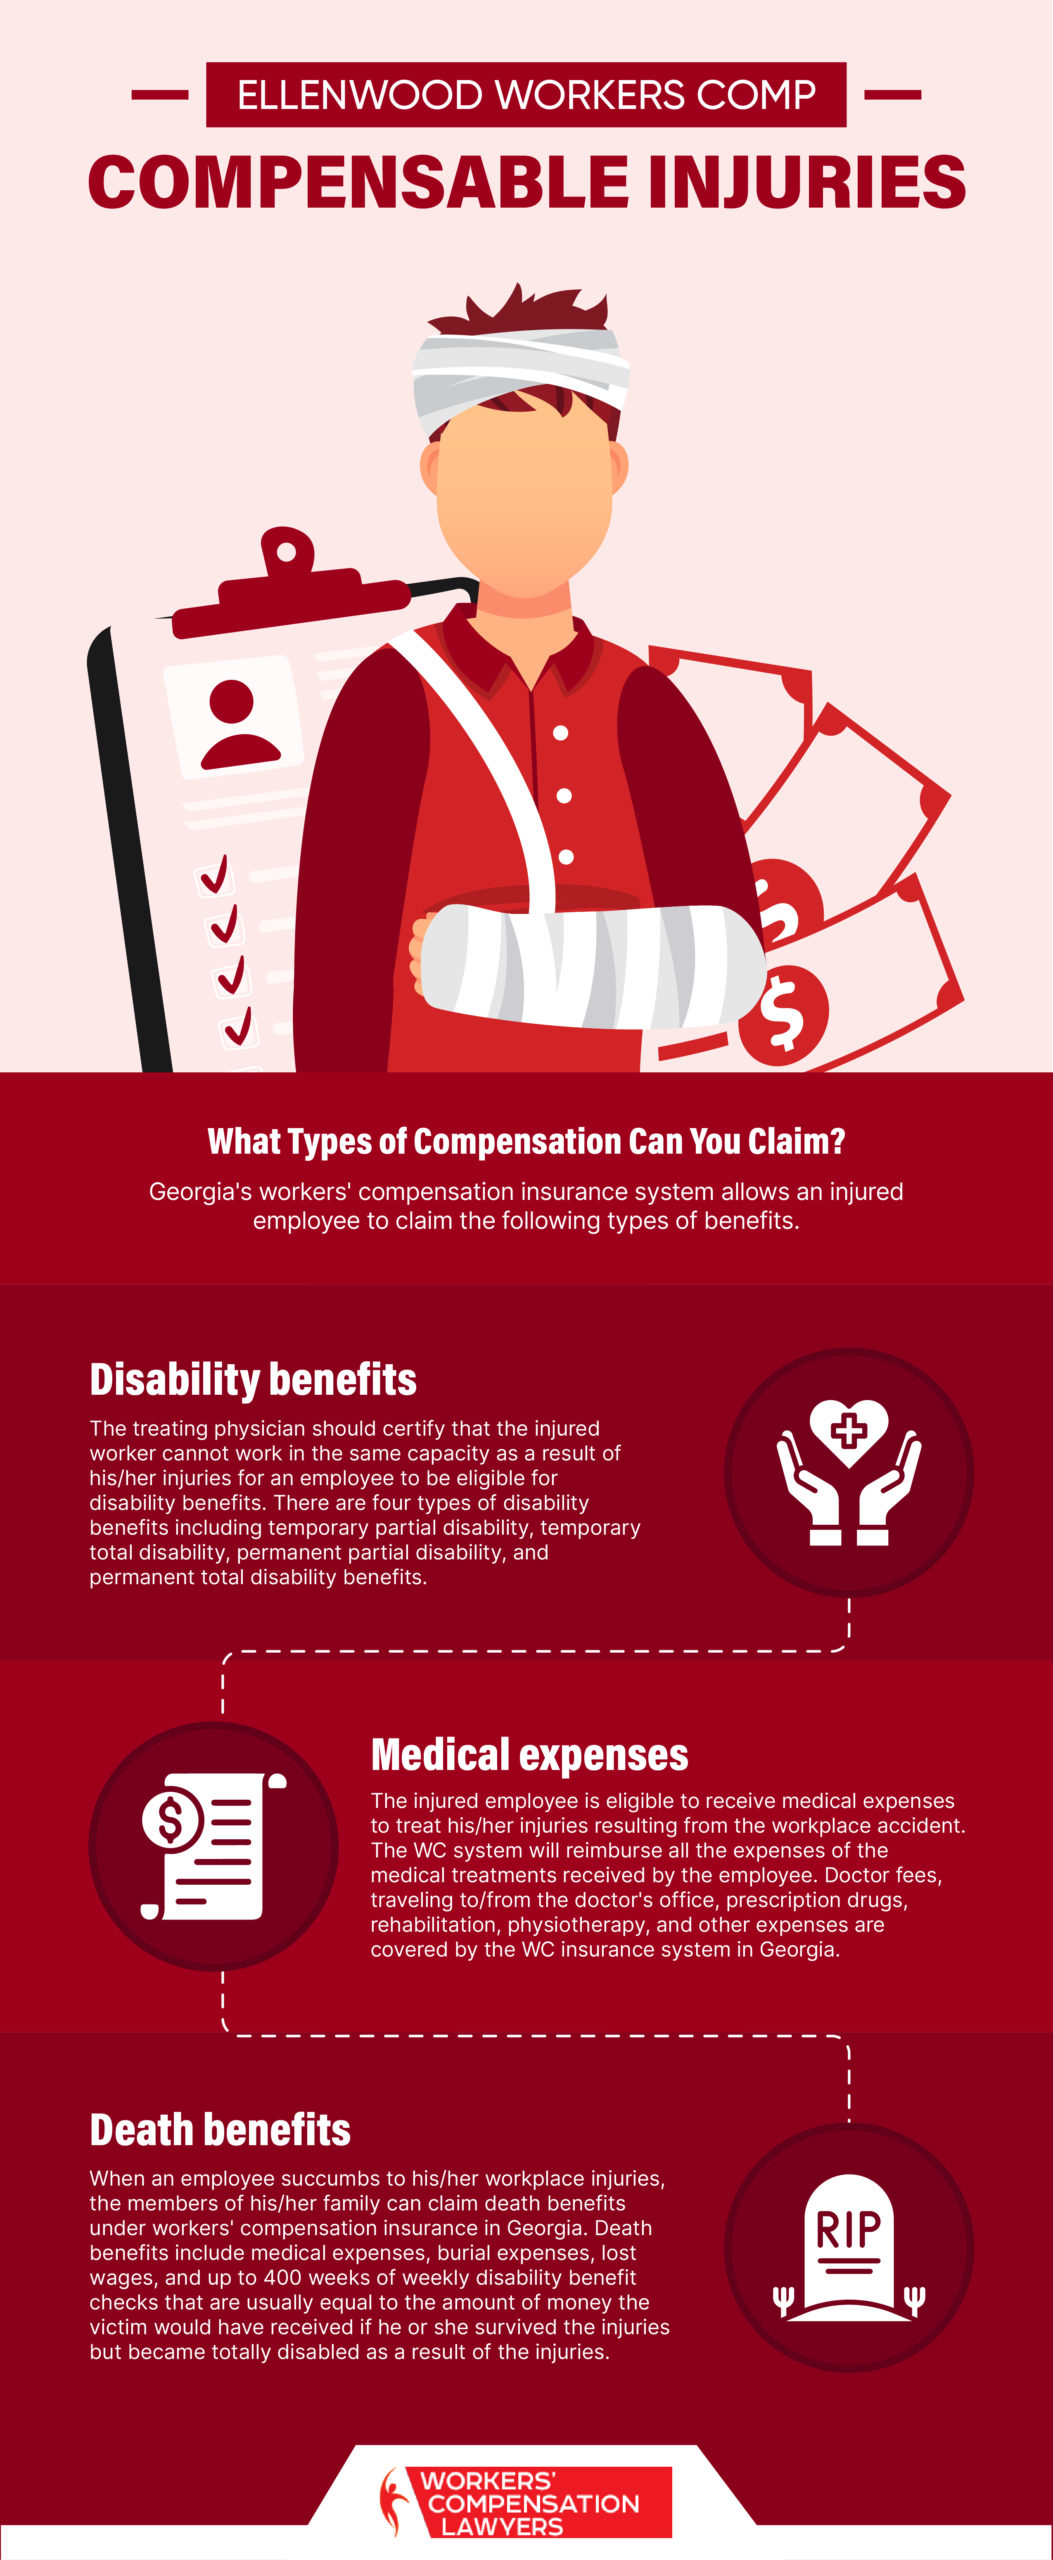 Ellenwood Workers Compensation Compensable Injury Infographic